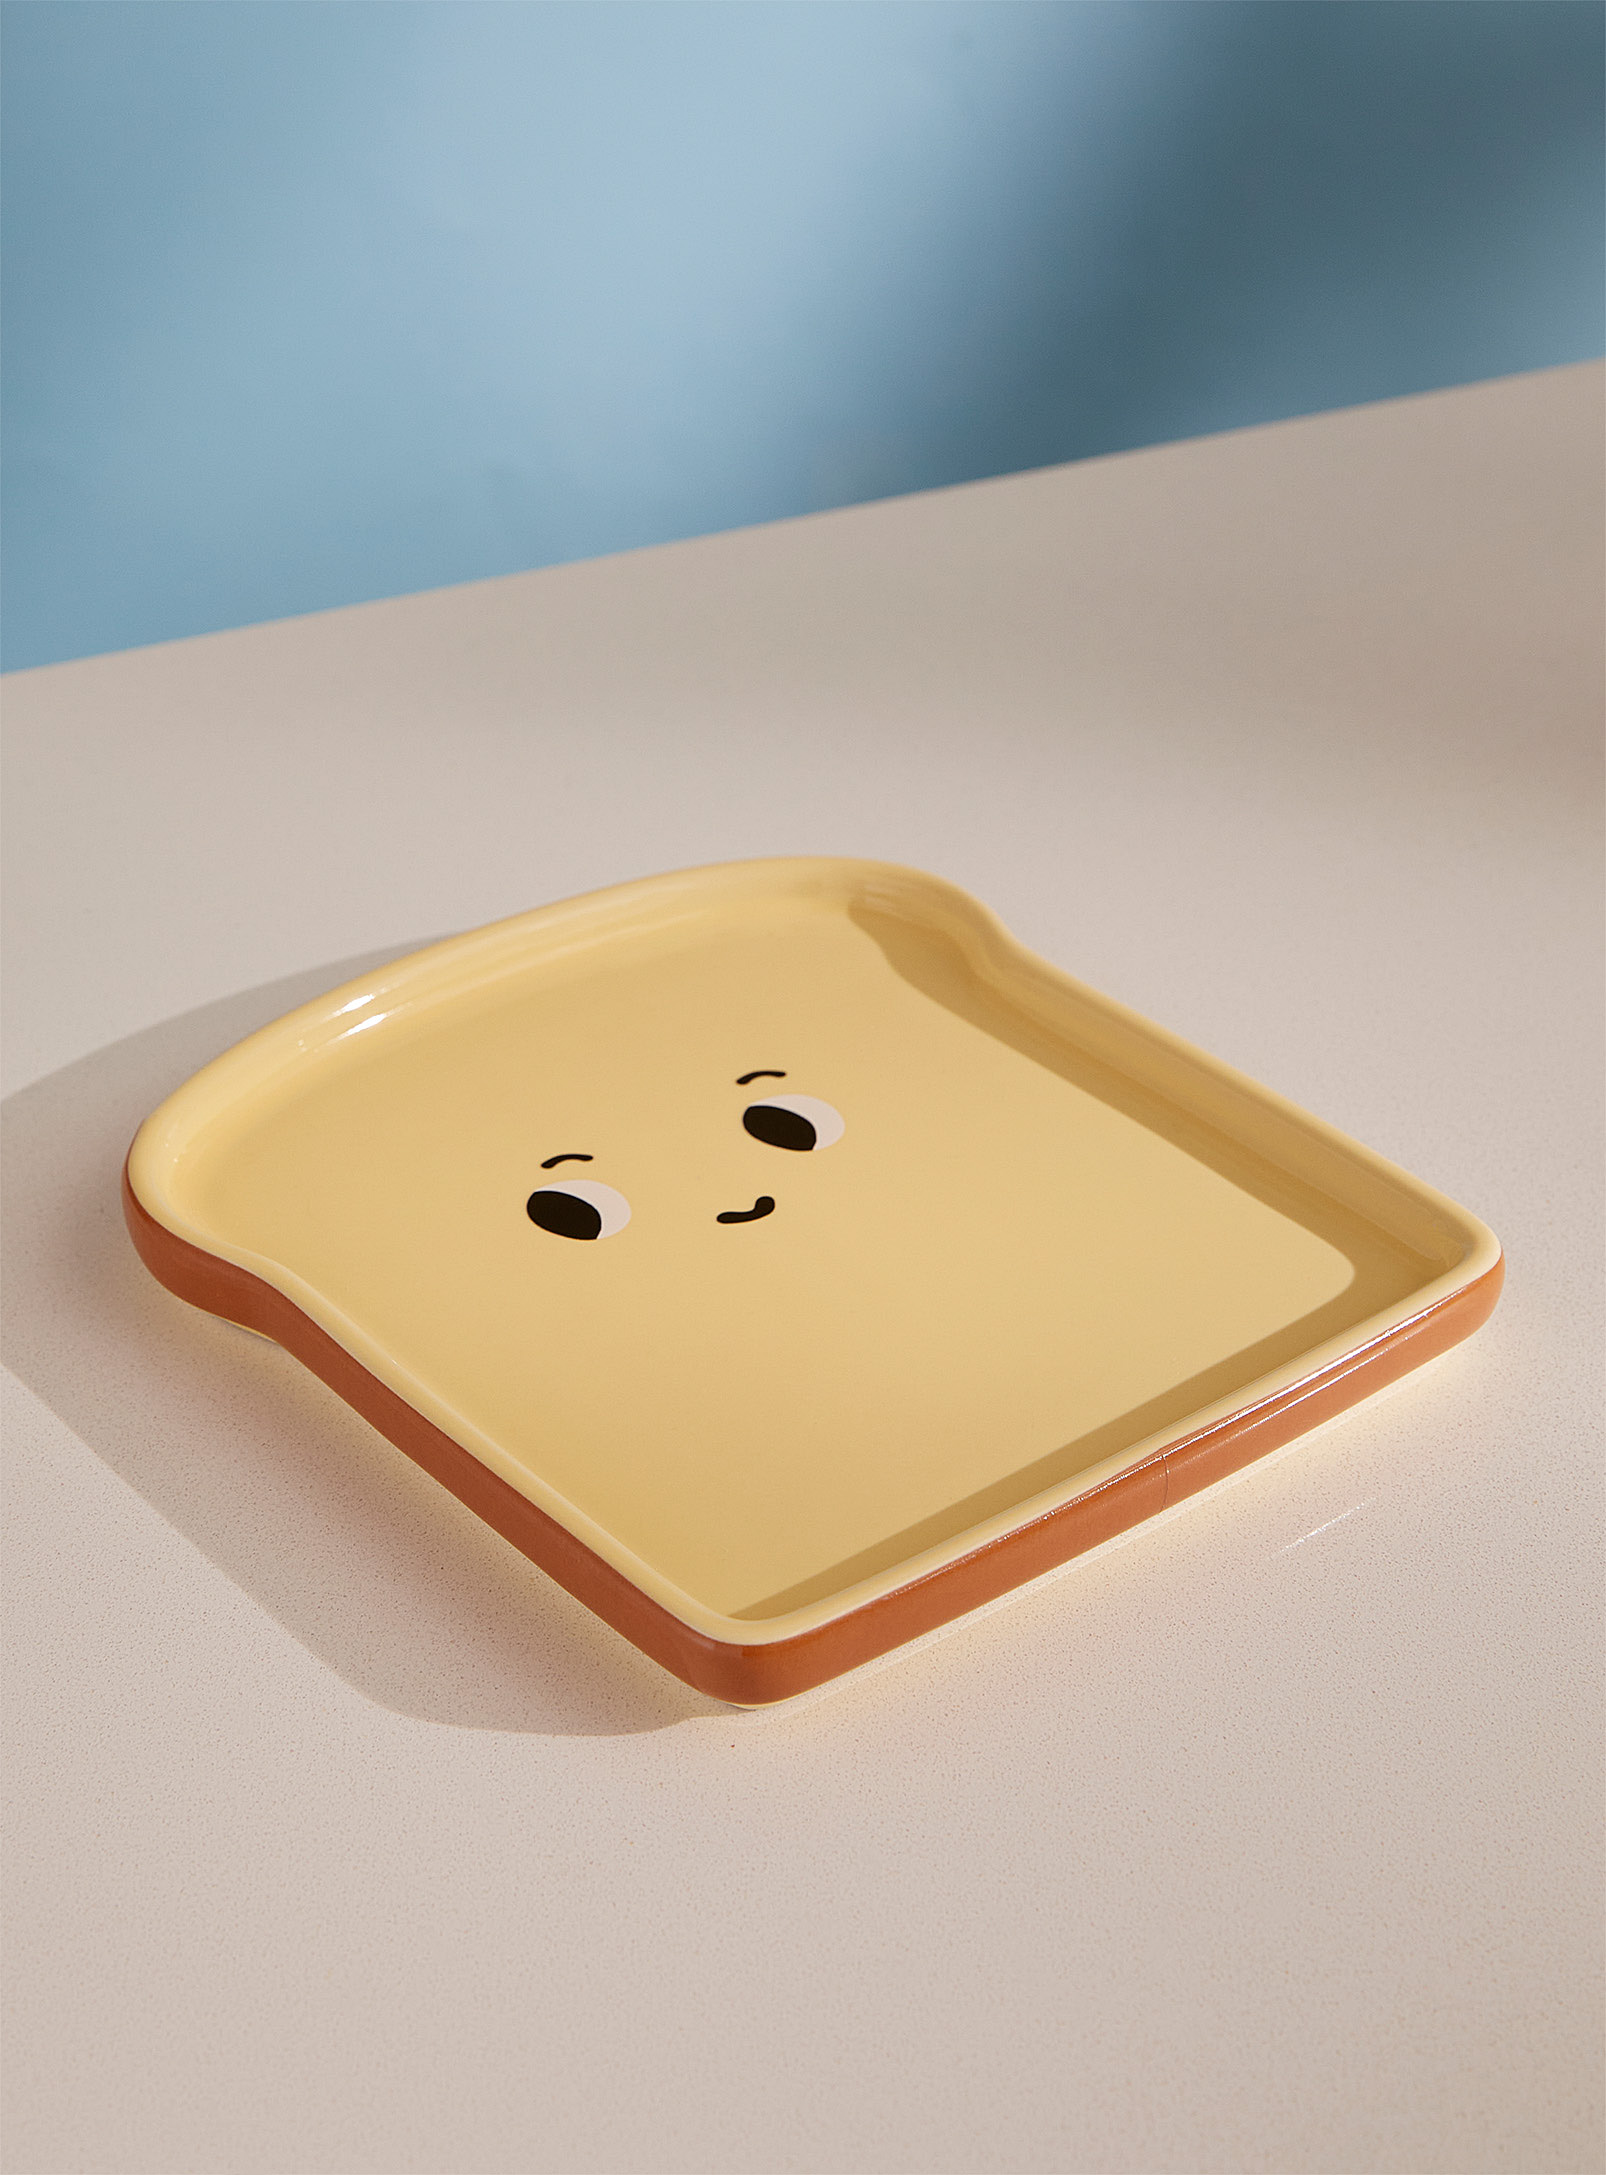 Danica Smiling Toast Plate In Honey